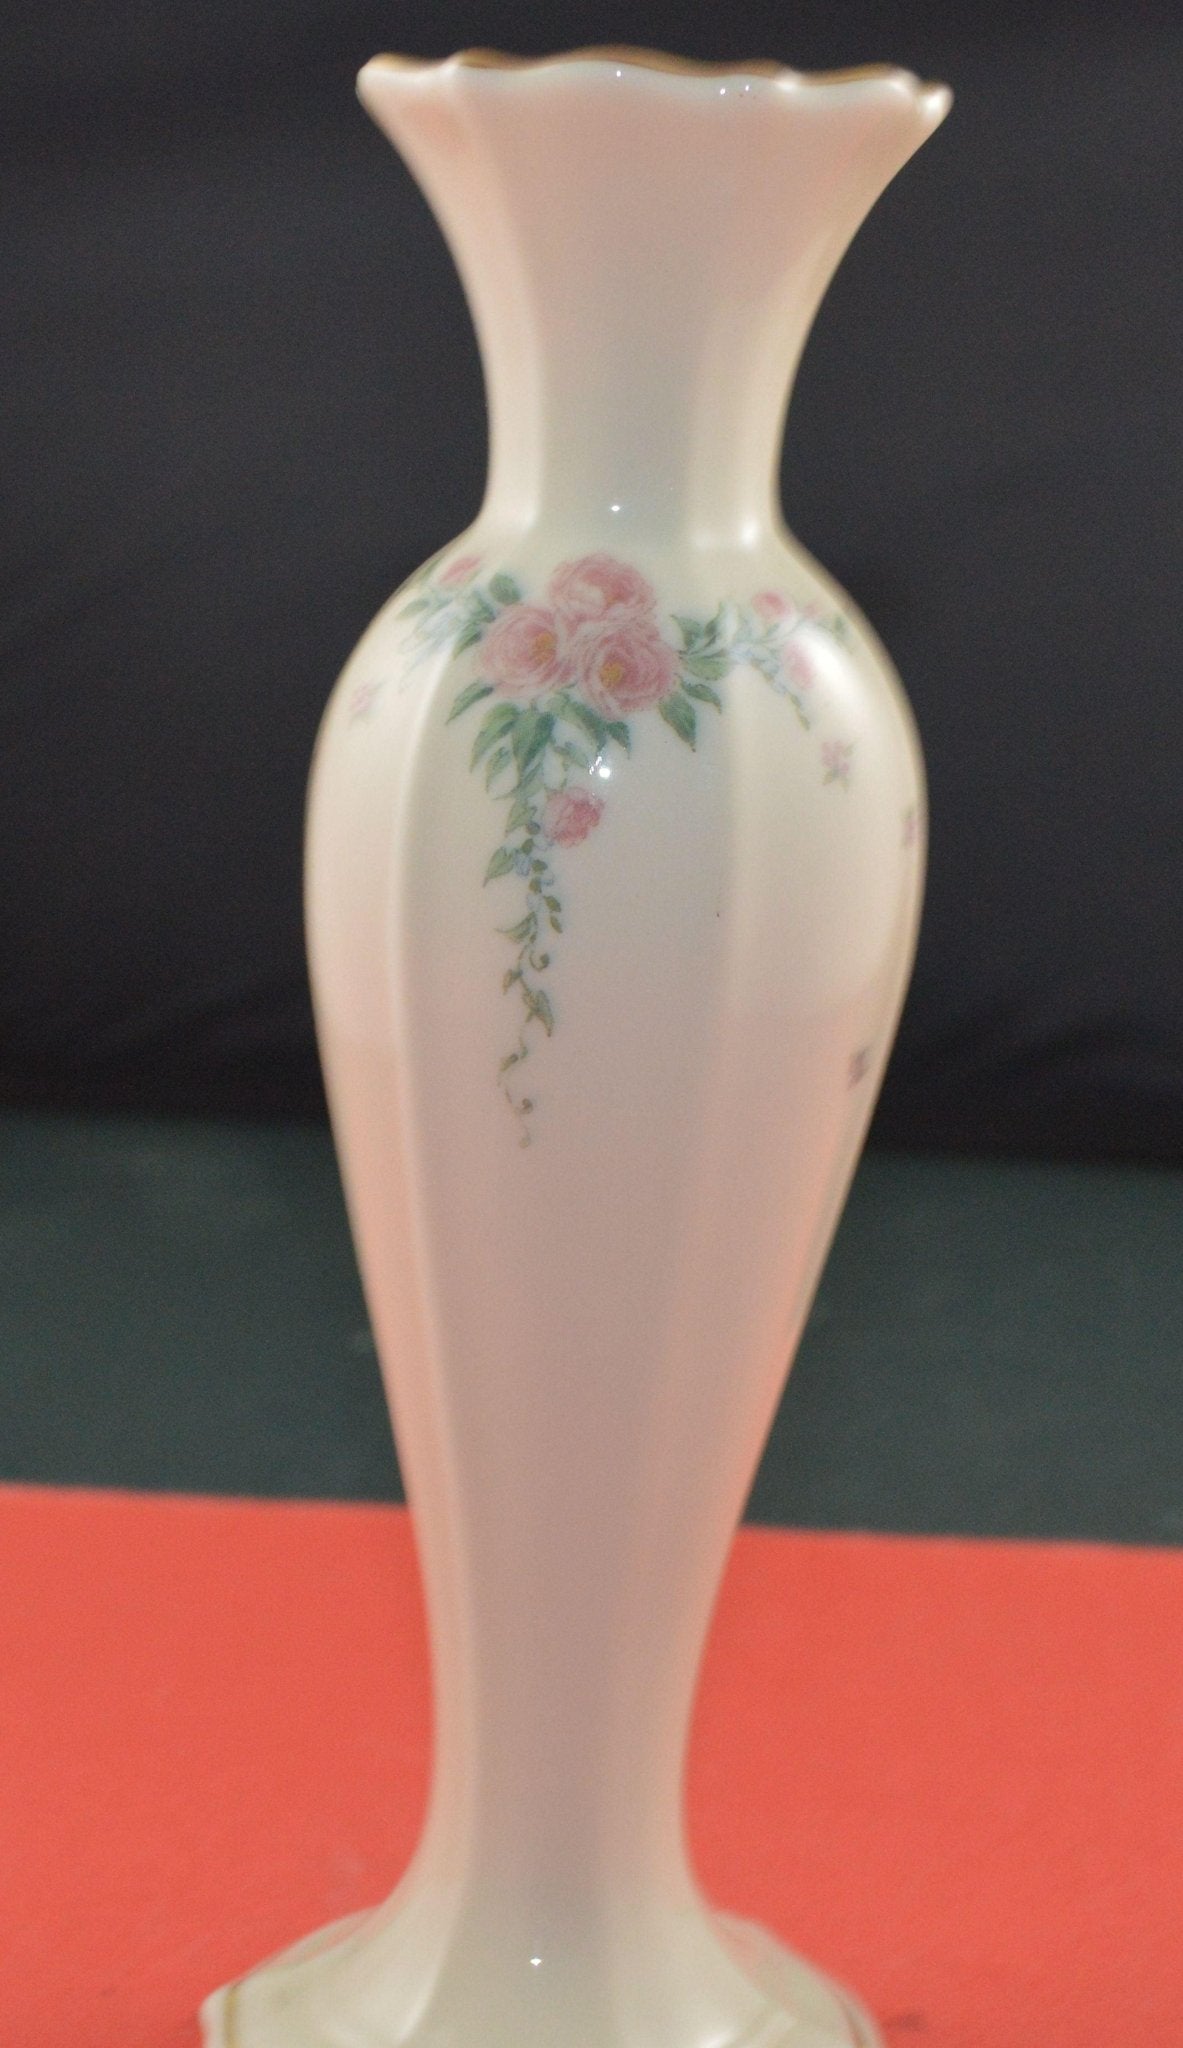 LENOX VASE(PREVIOUSLY OWNED) GOOD CONDITION - TMD167207